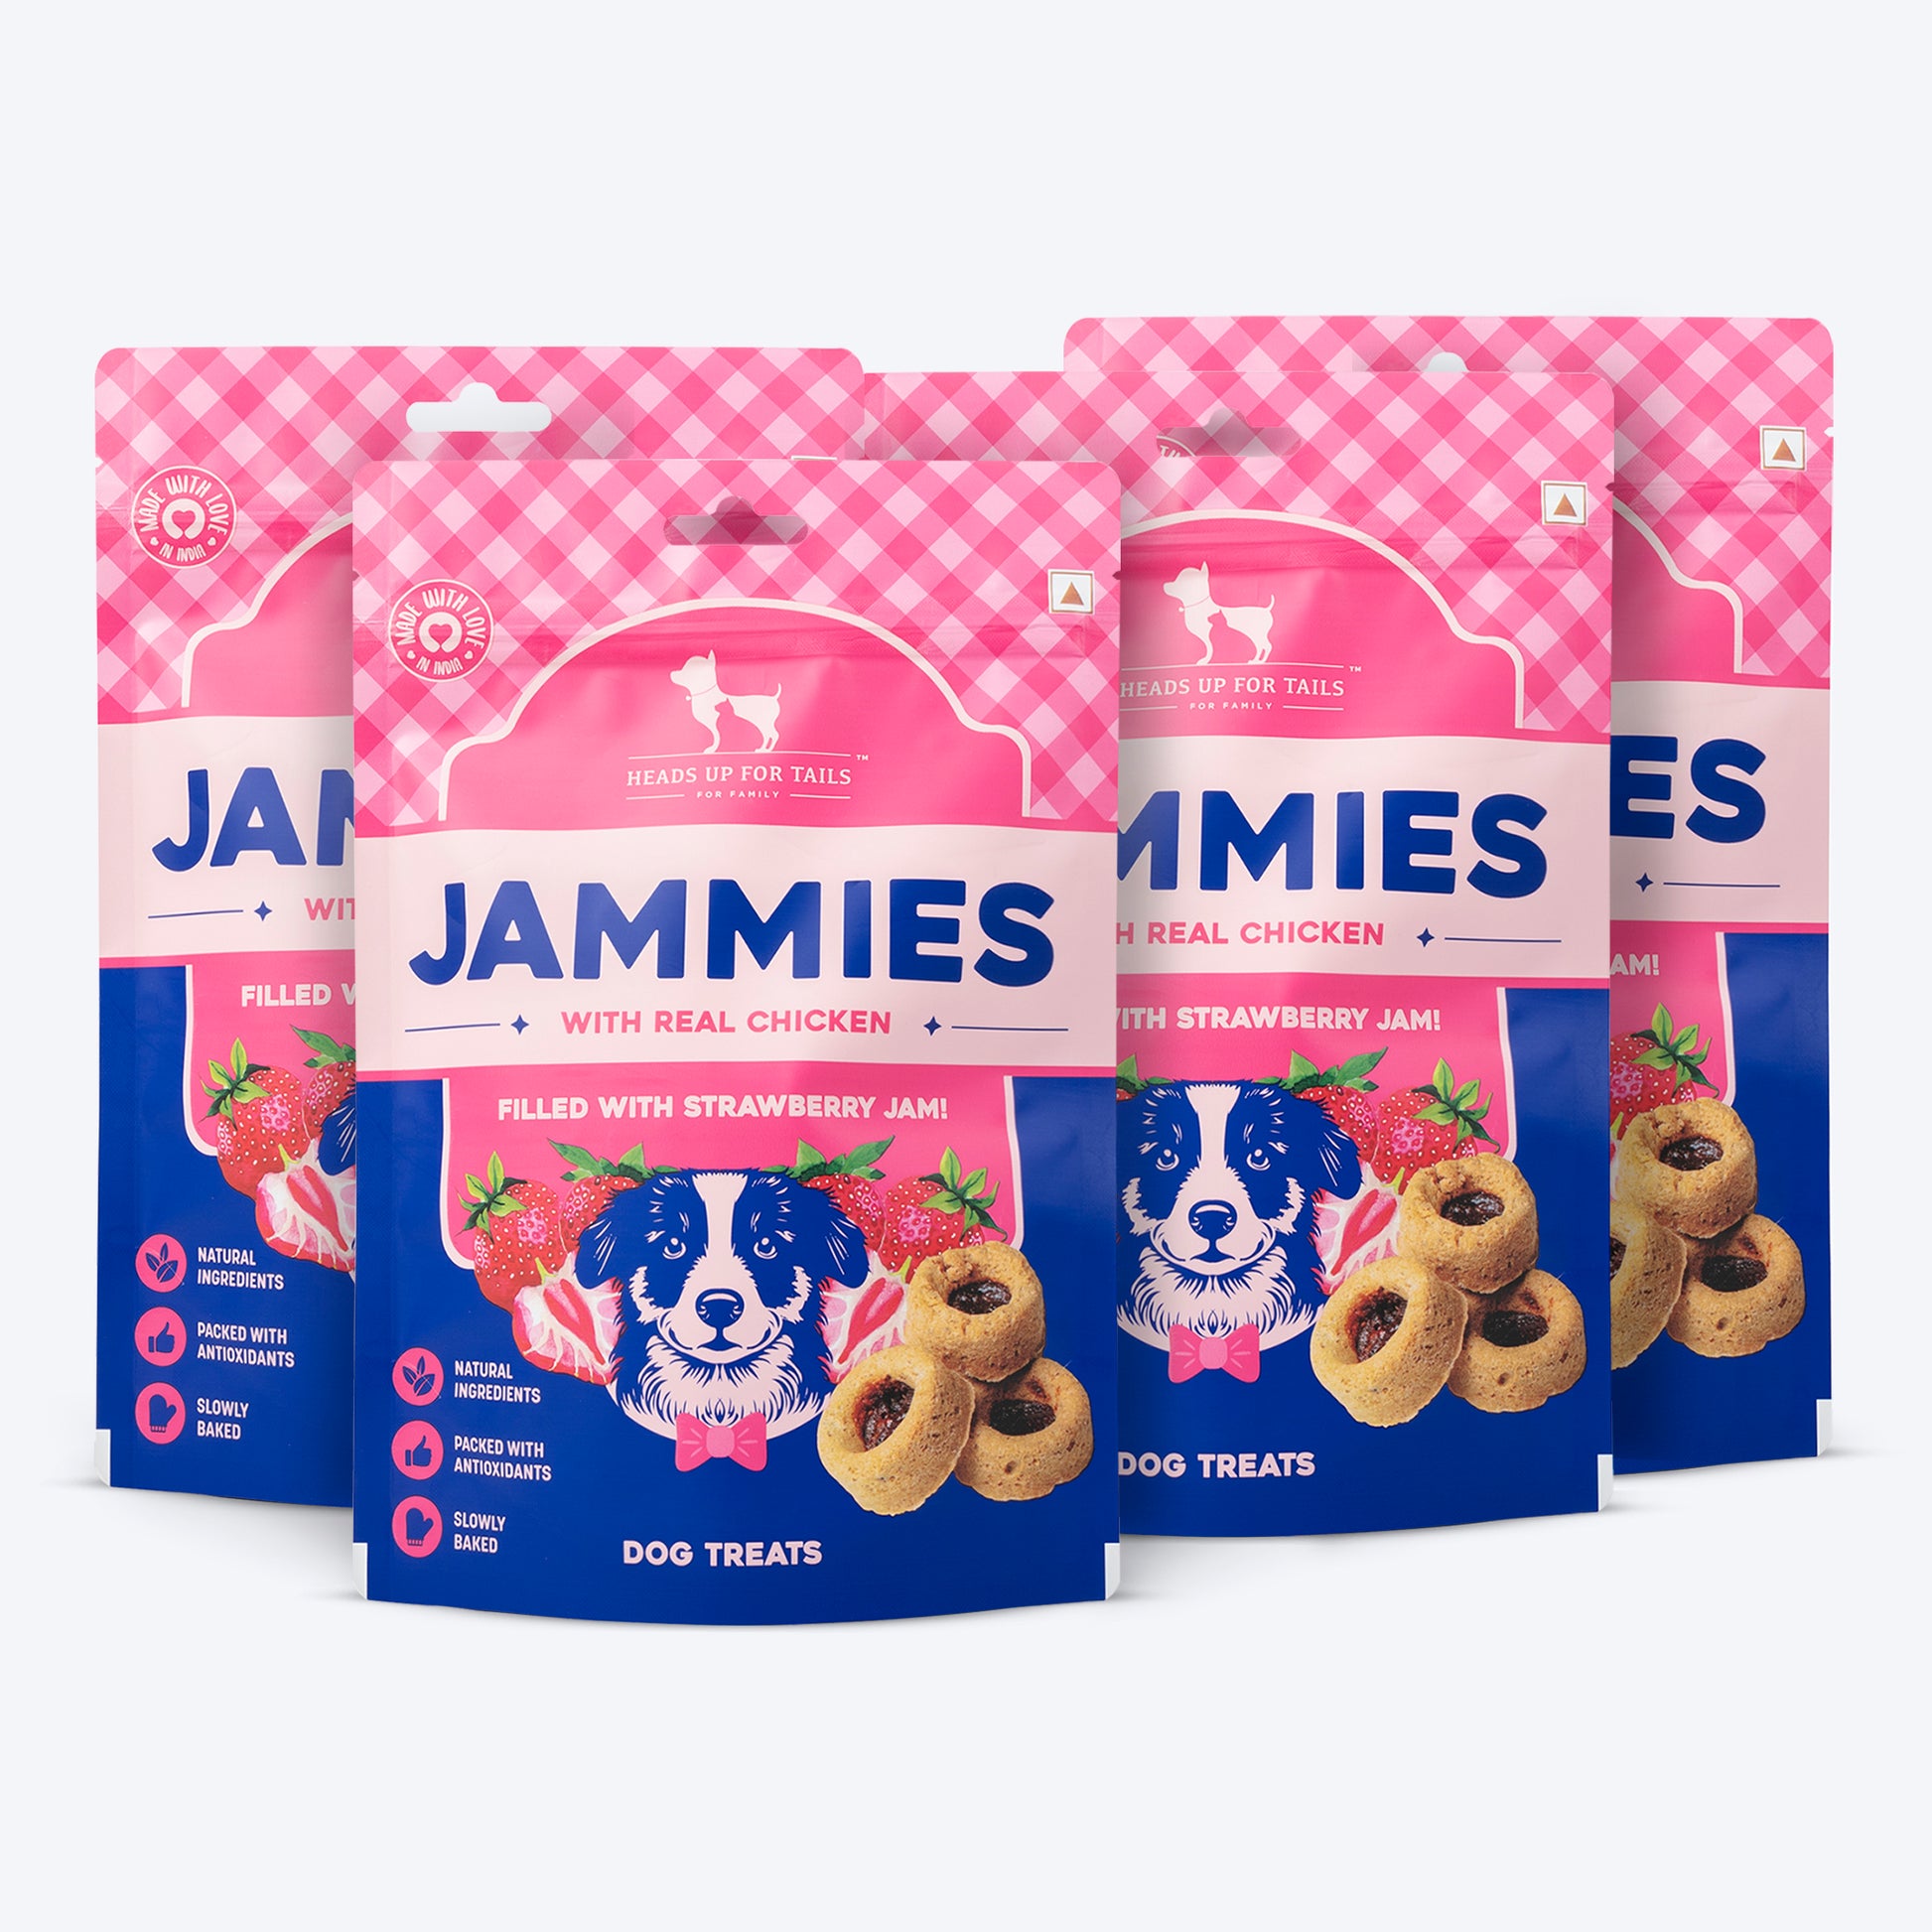 HUFT Jammies - Strawberry Jam Filled Dog Treats - 100 gm - Heads Up For Tails